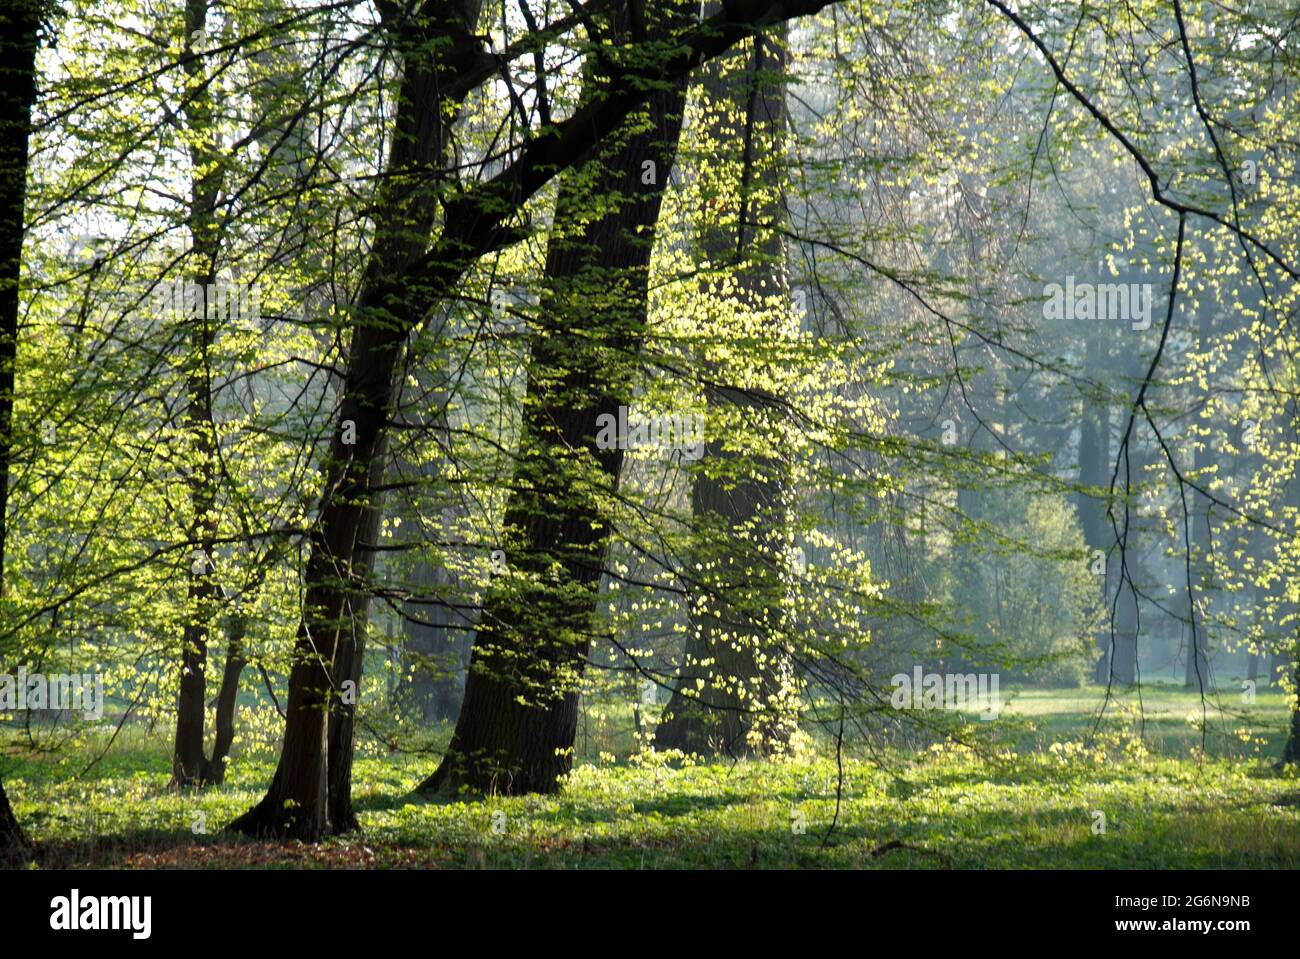 Landscape with trees in the Park Sansouci Stock Photo